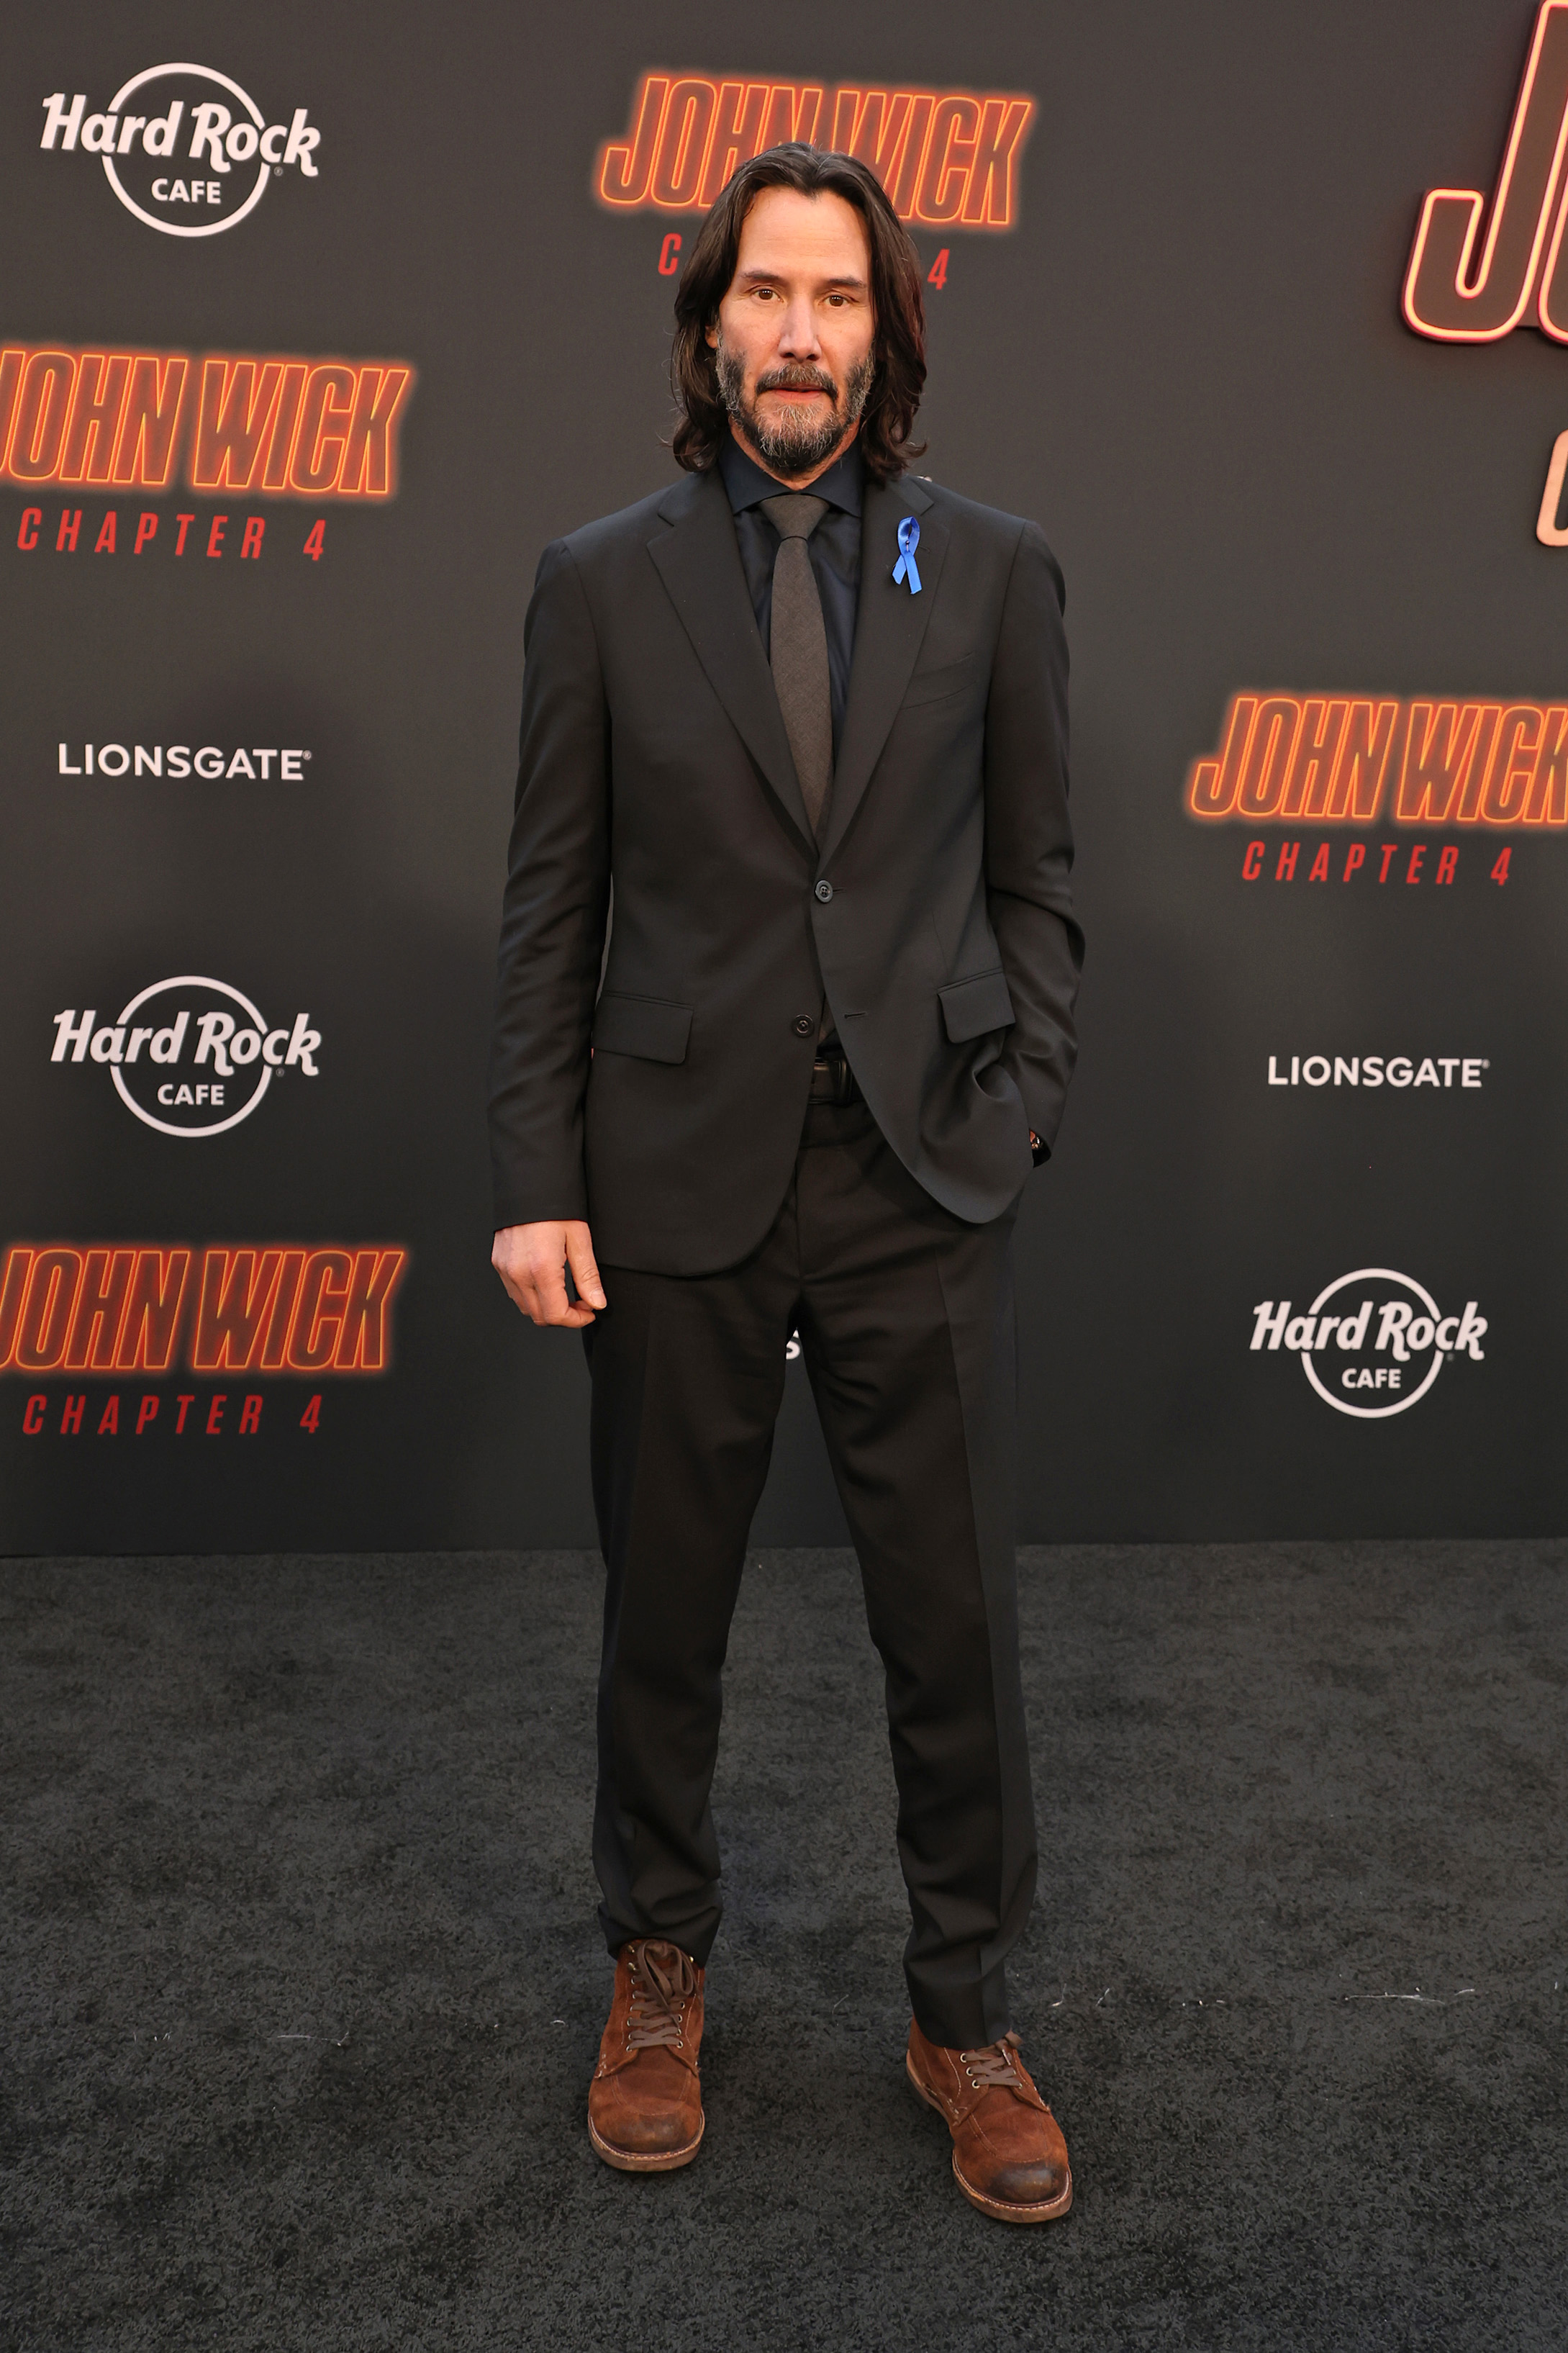 Keanu Reeves at the premiere of "John Wick: Chapter 4" in Hollywood, California, on March 20, 2023. | Source: Getty Images